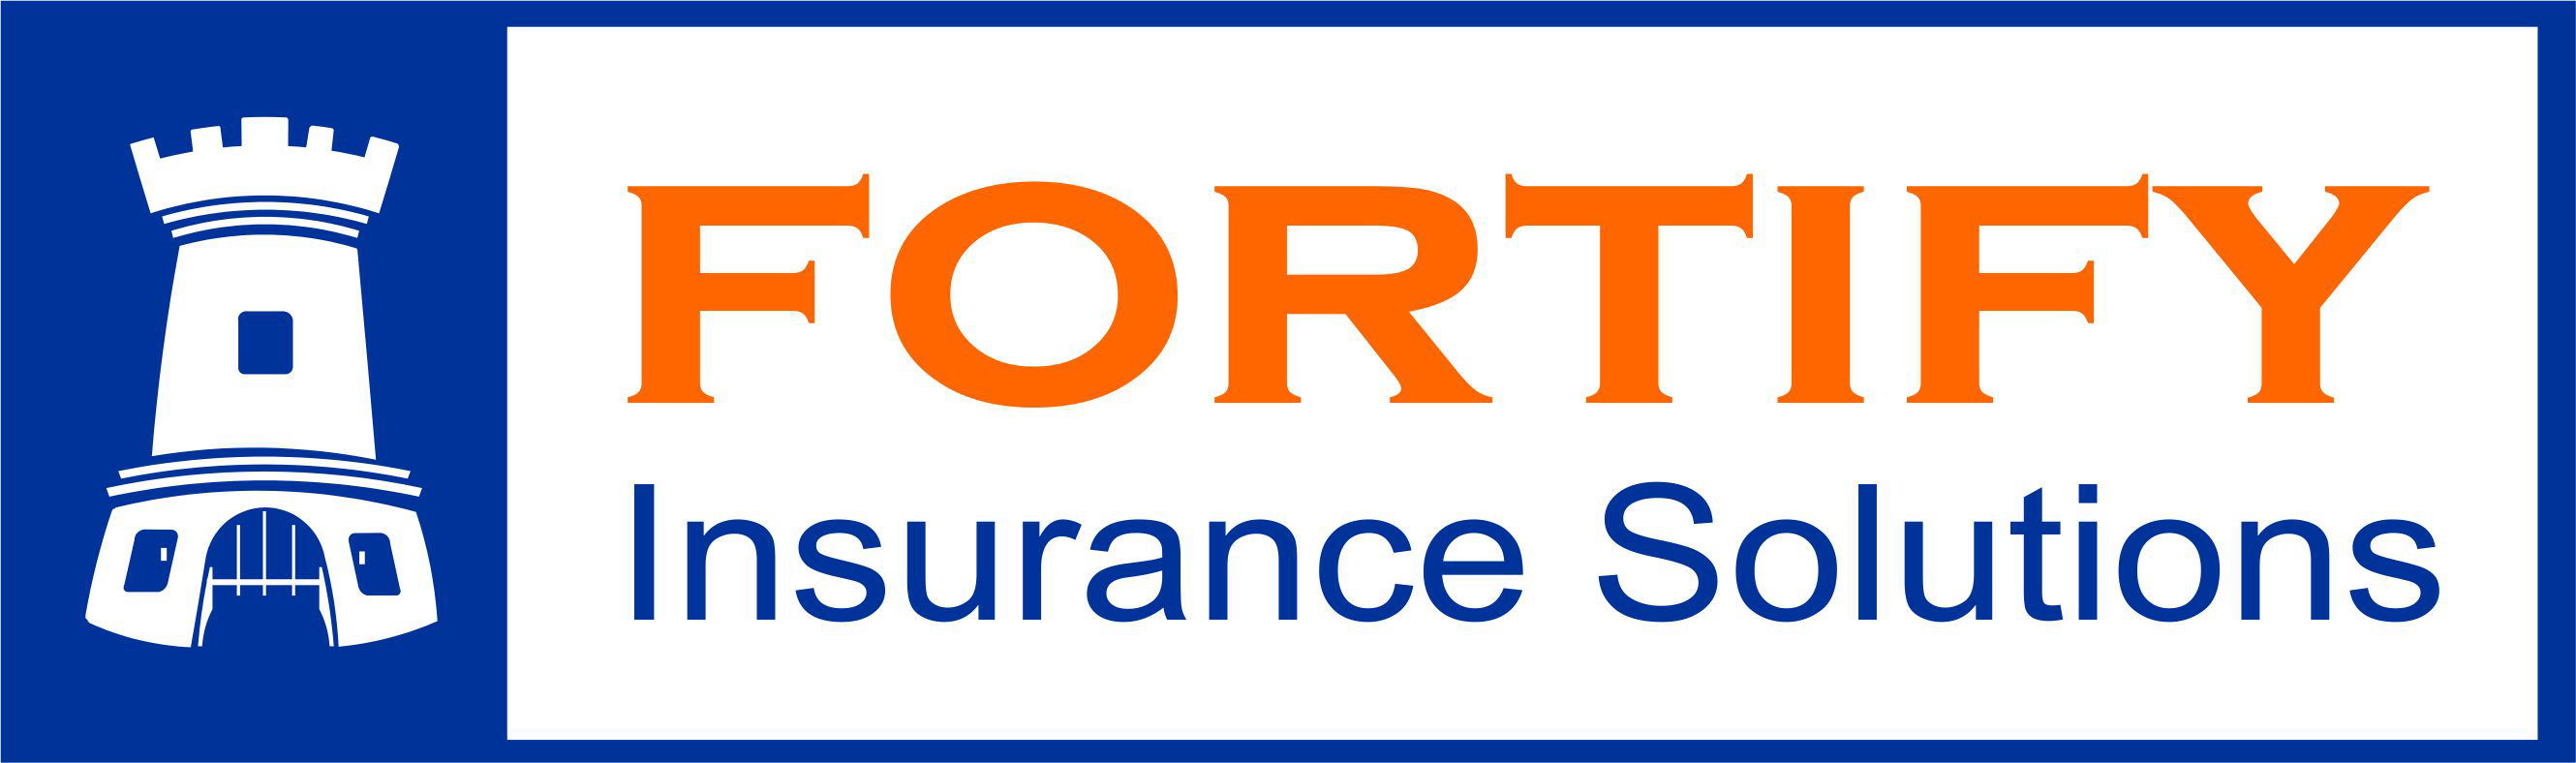 FORTIFY INSURANCE SOLUTIONS